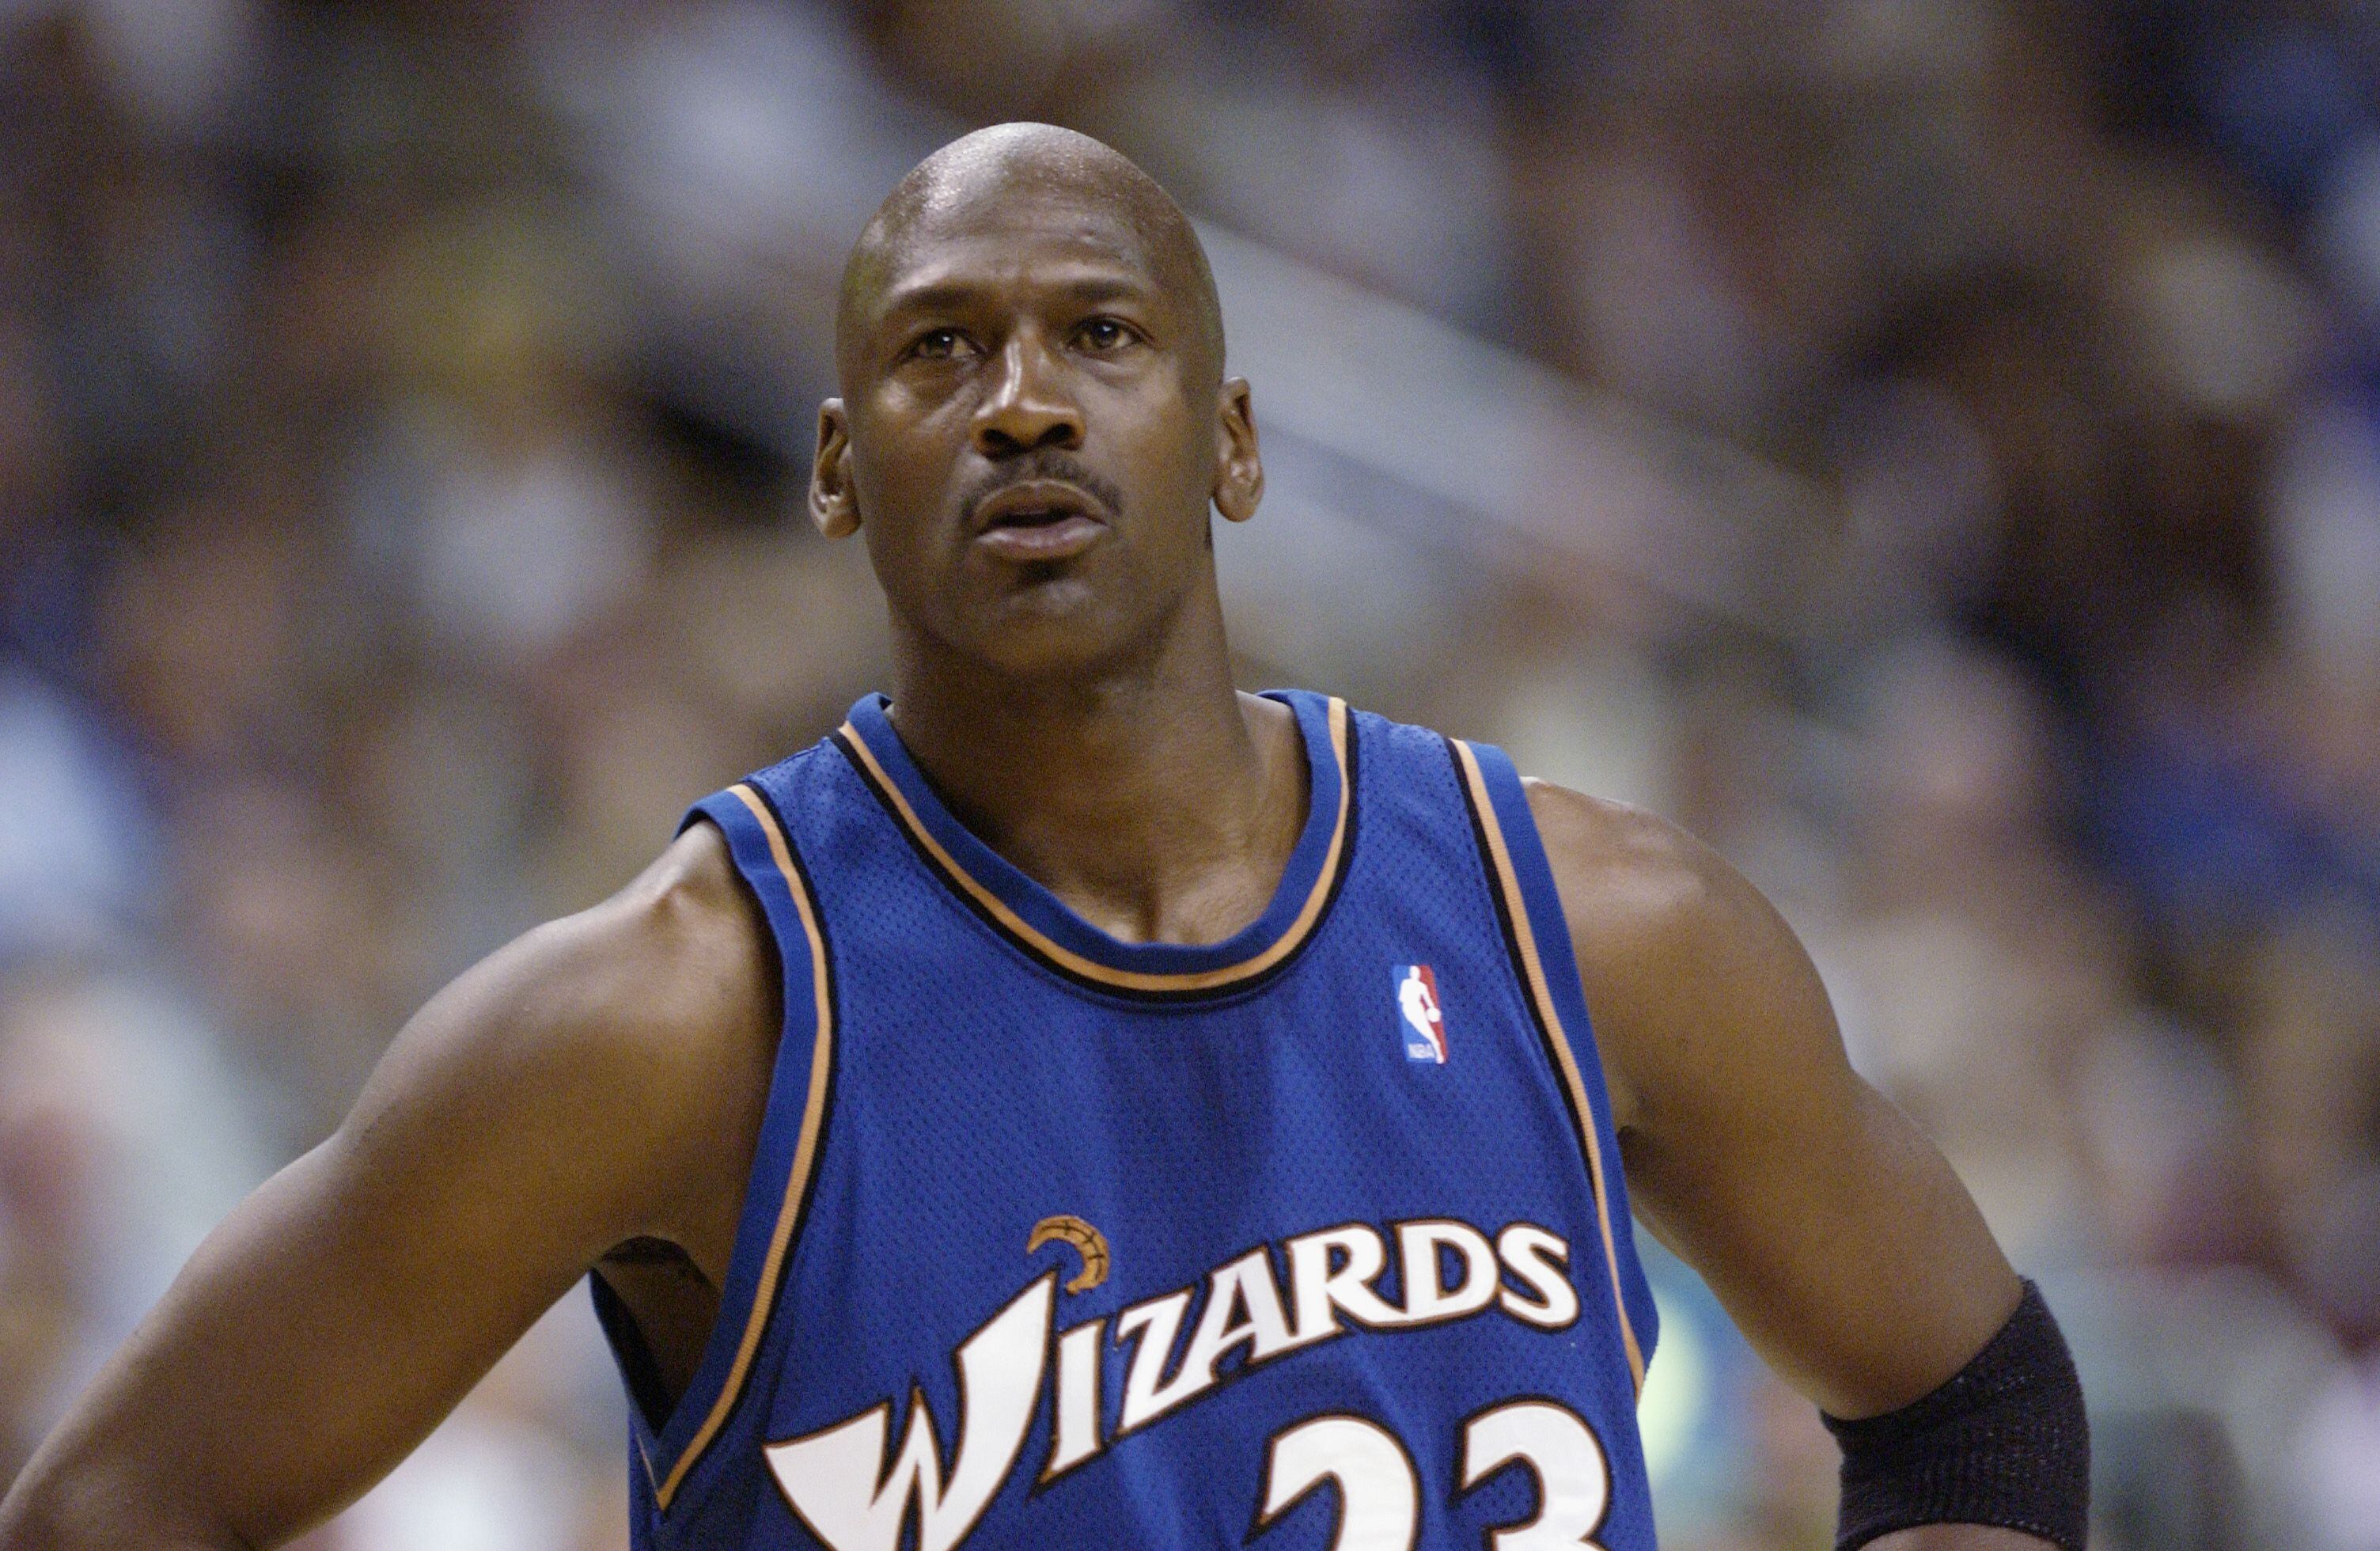 Michael Jordan's 1998 Finals Jersey Could Fetch up to $5 Million at Auction